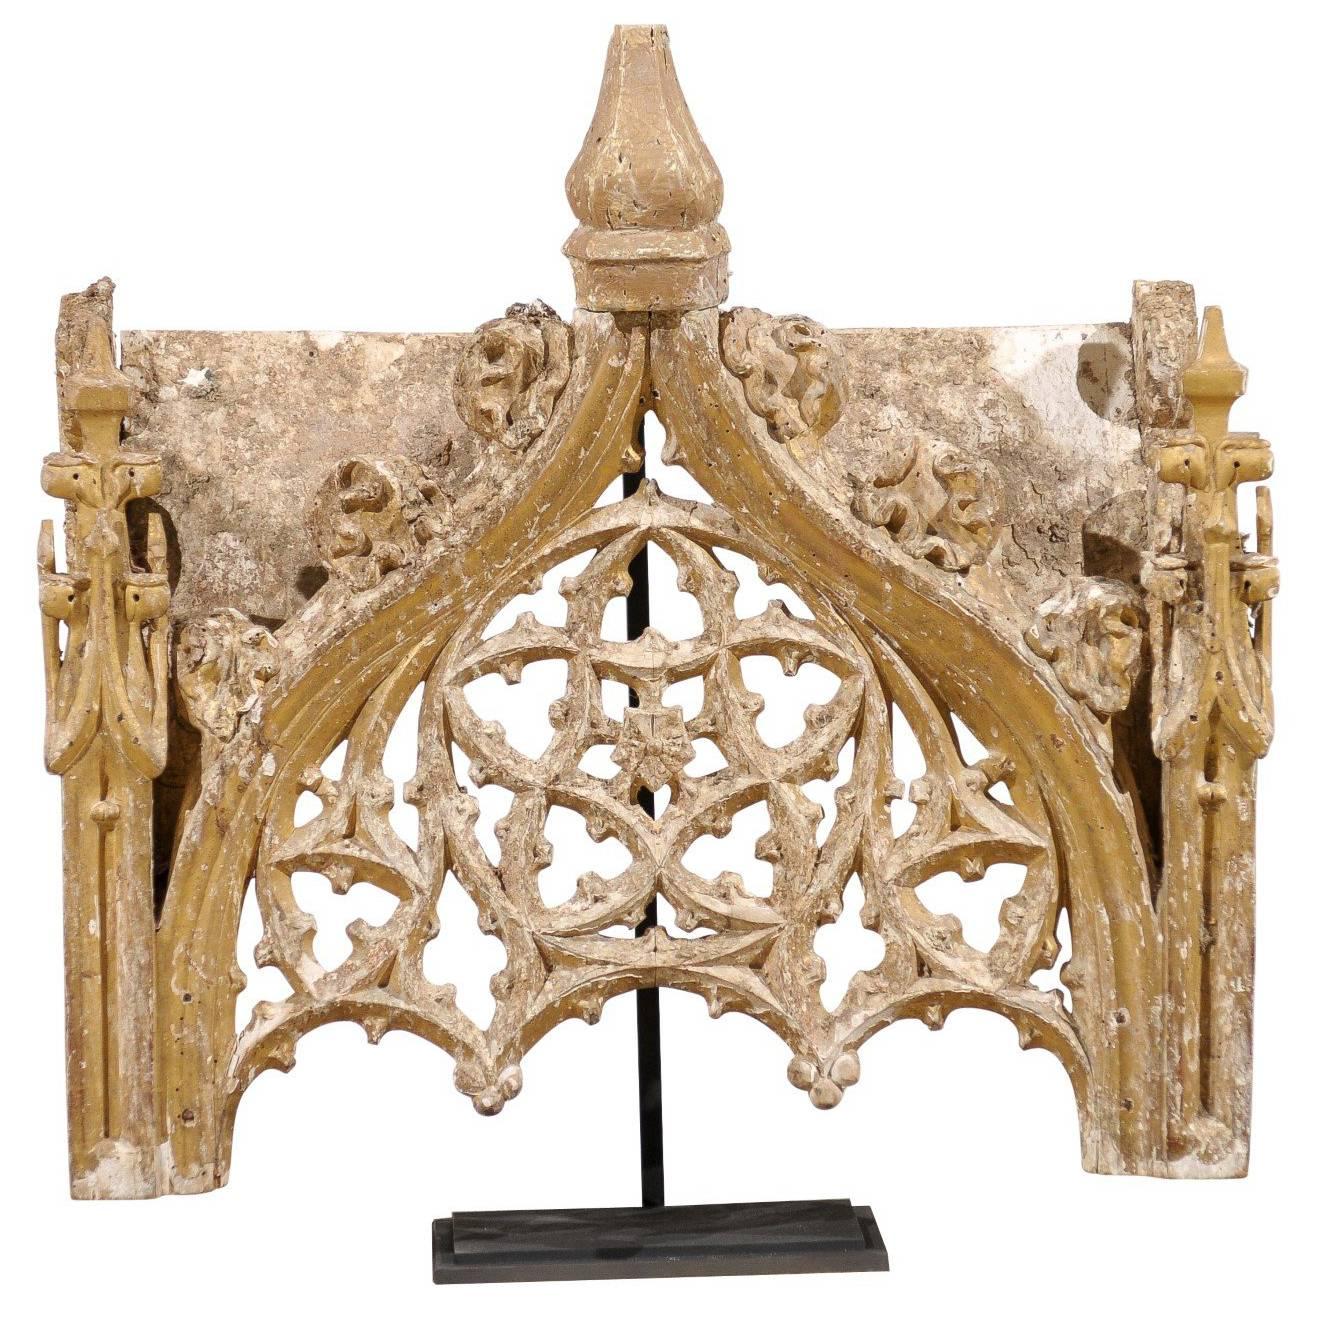 Italian 18th Century Gilded Wood Fragment on Stand with Intricate Carvings